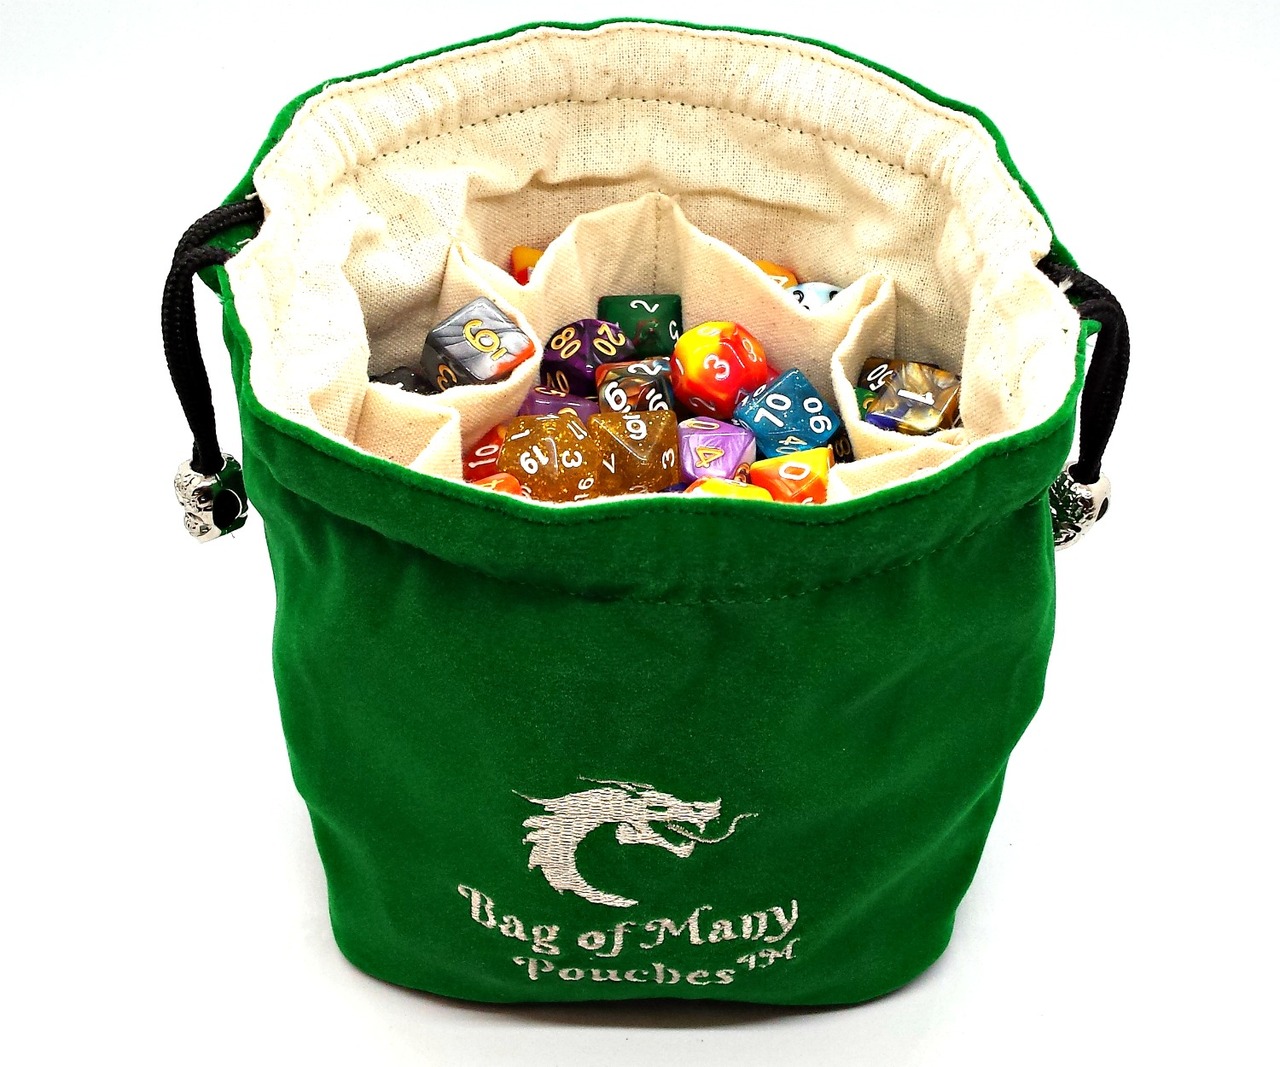 Bag of Many Pouches RPG Dnd Dice Bag Green